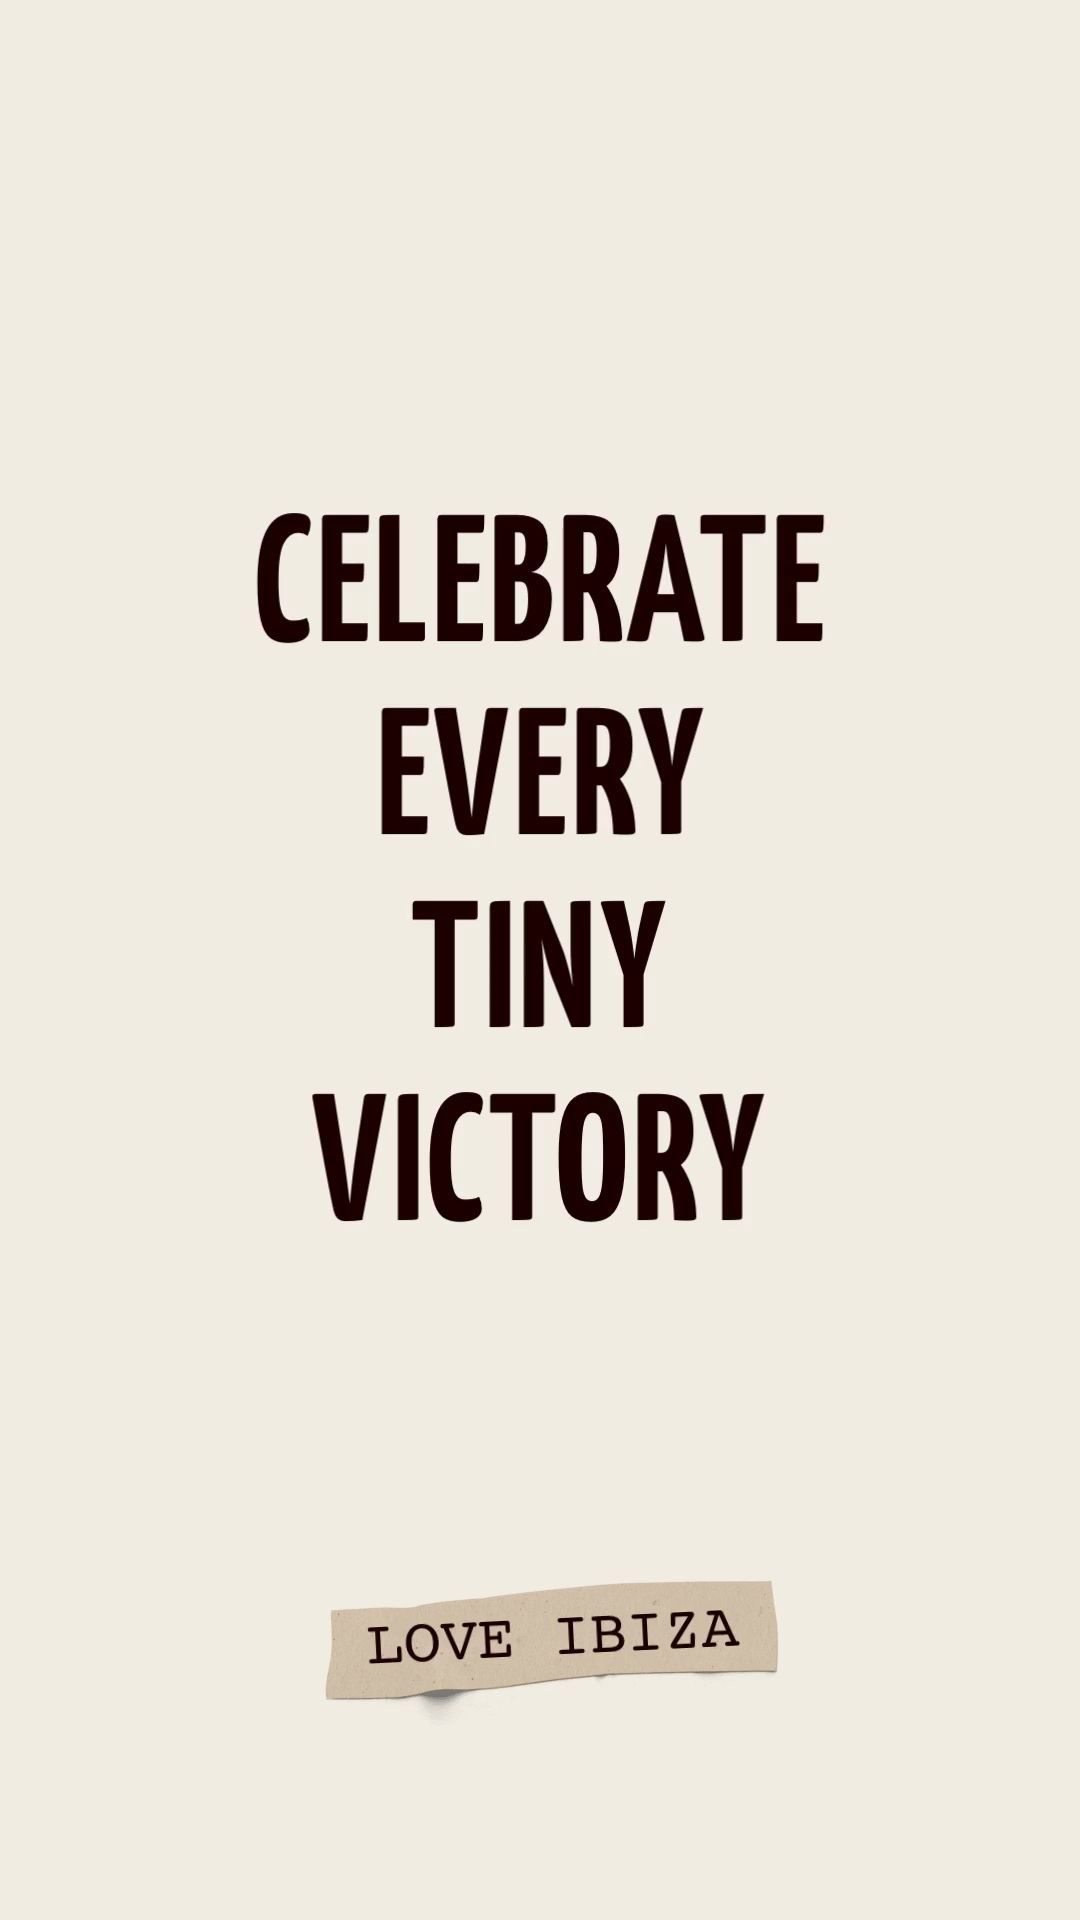 Celebrate every tiny victory - Celebrate every tiny victory -   14 chic style Quotes ideas